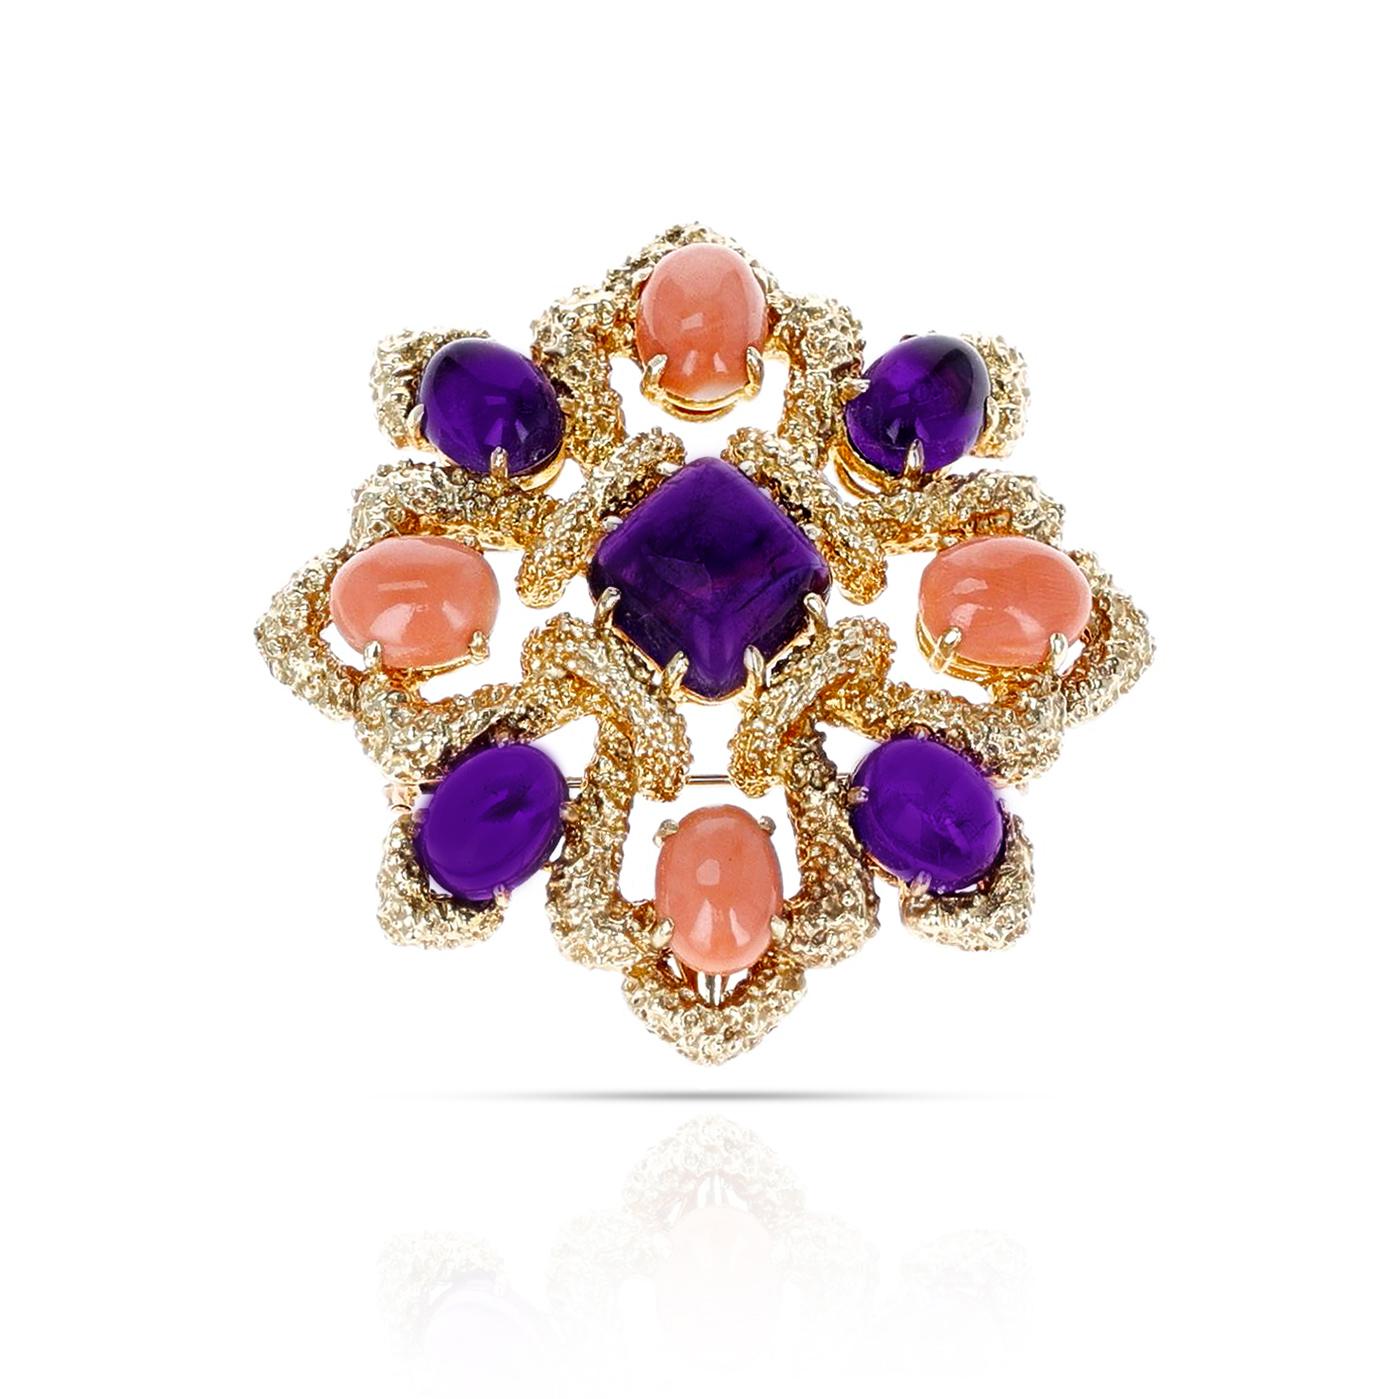 A magnificent Van Cleef & Arpels Amethyst and Coral Cabochon Brooch made in 18 Karat Yellow Gold. The total weight of the brooch is 63 grams. 
